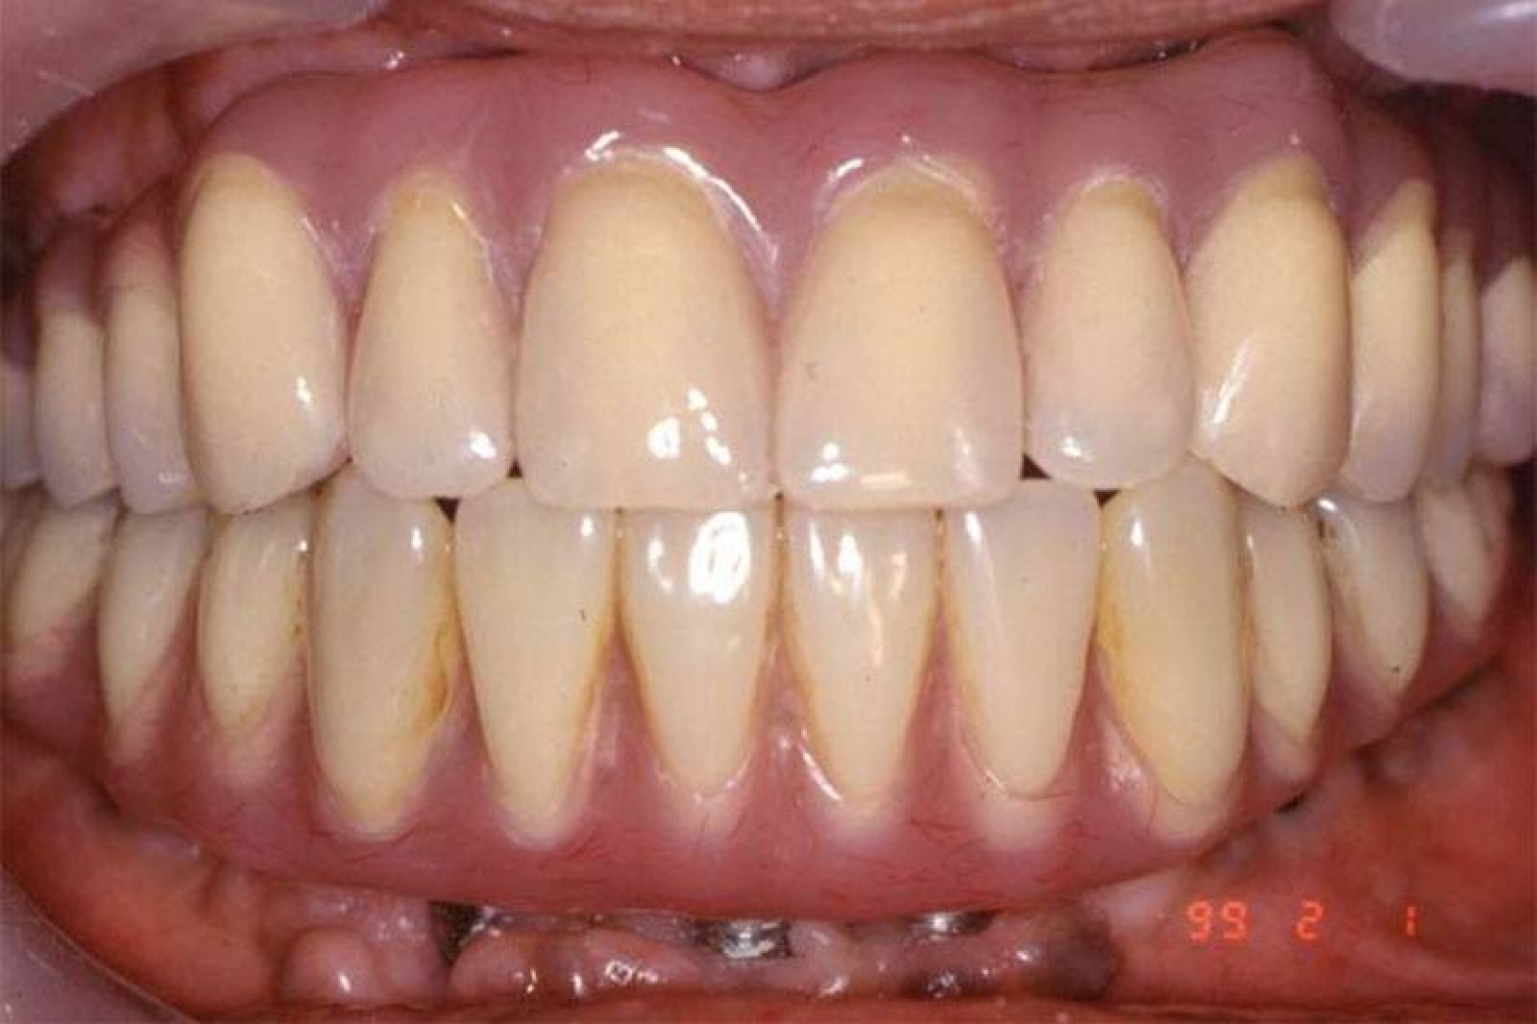 This patient received her smile restoration with fixed but detachable plastic acrylic dentures.